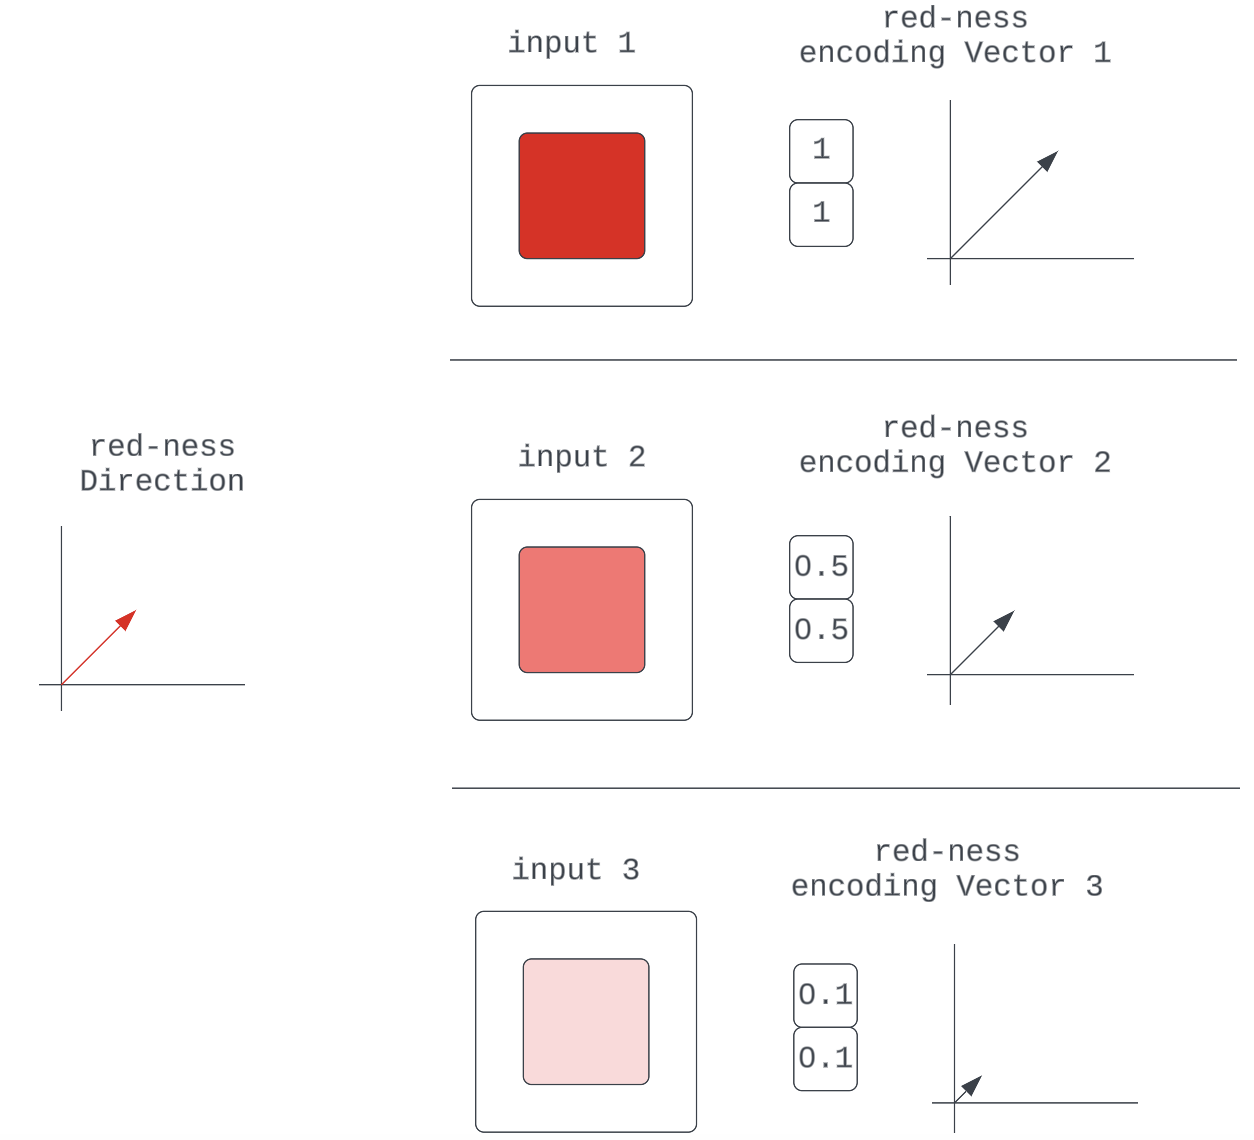 Various encoding vectors for the red-ness quality in the input